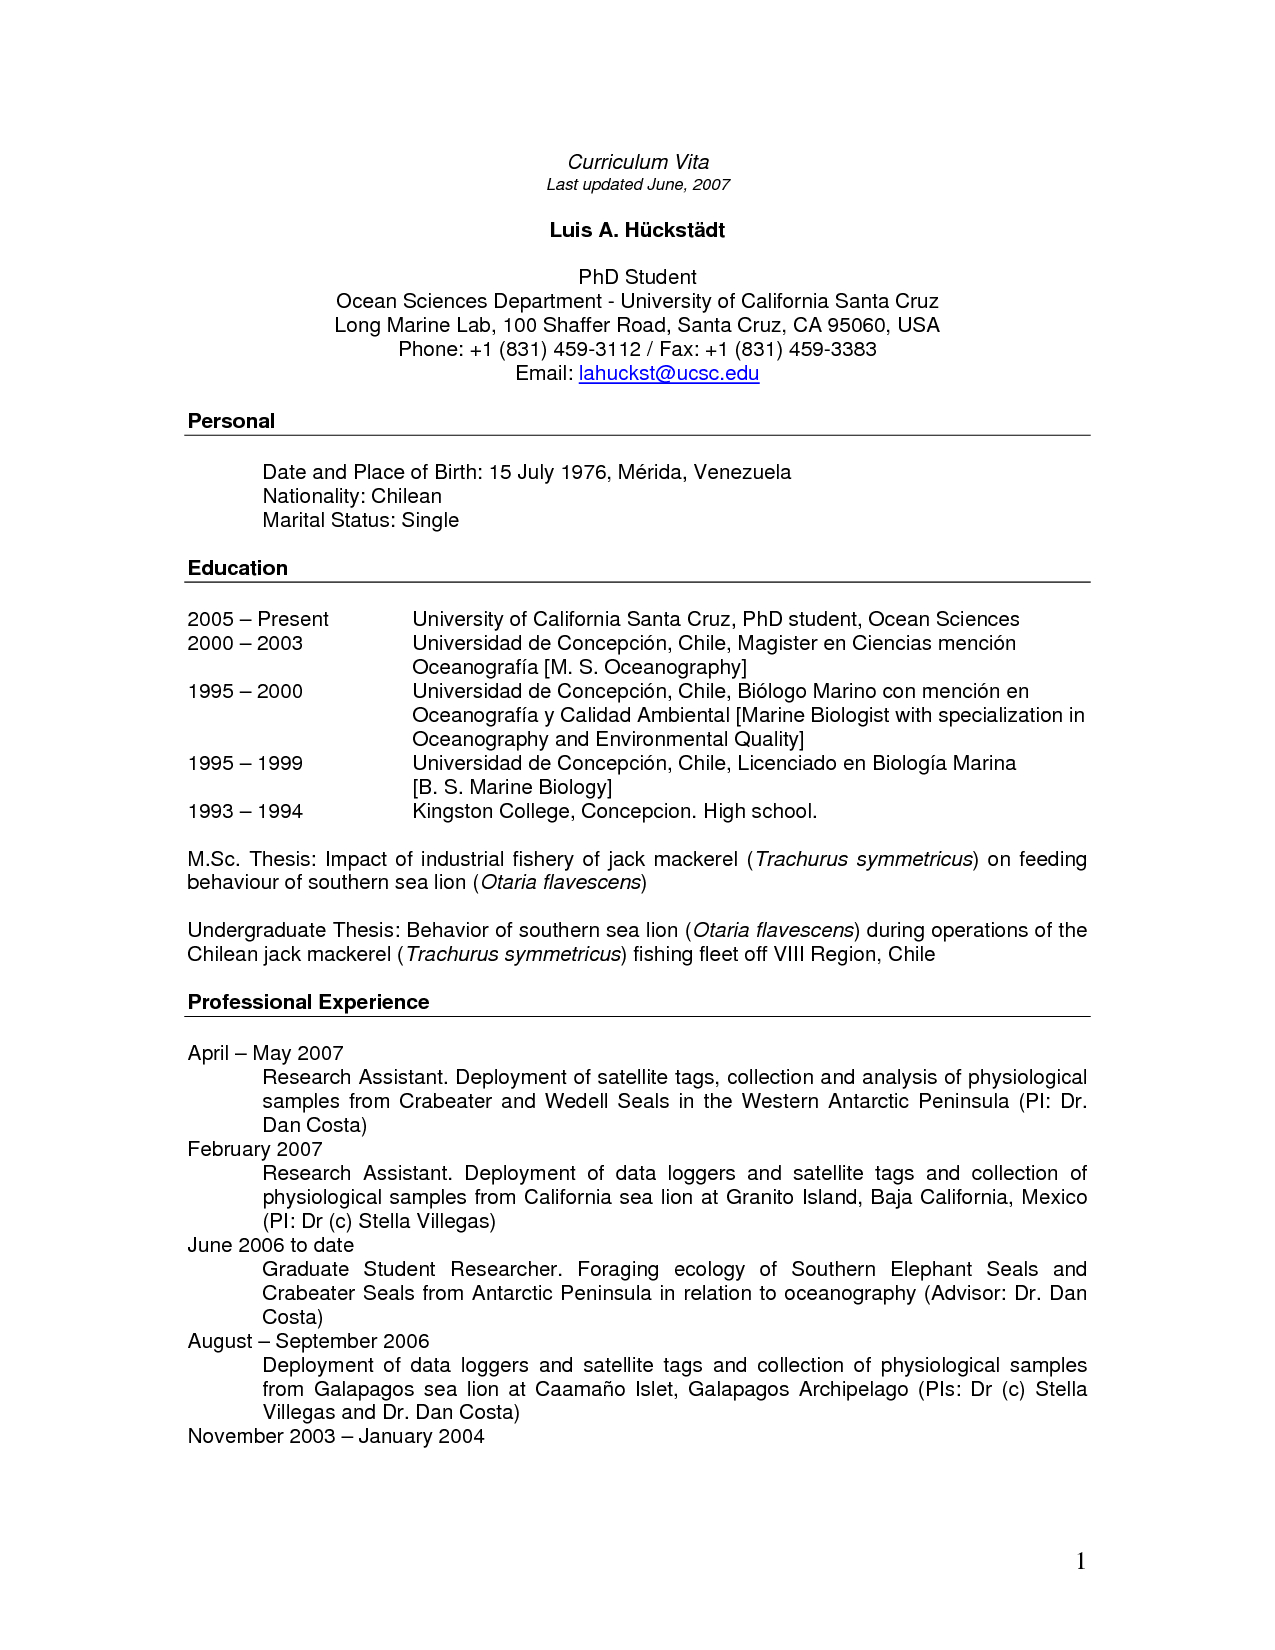 resume templates for phd application